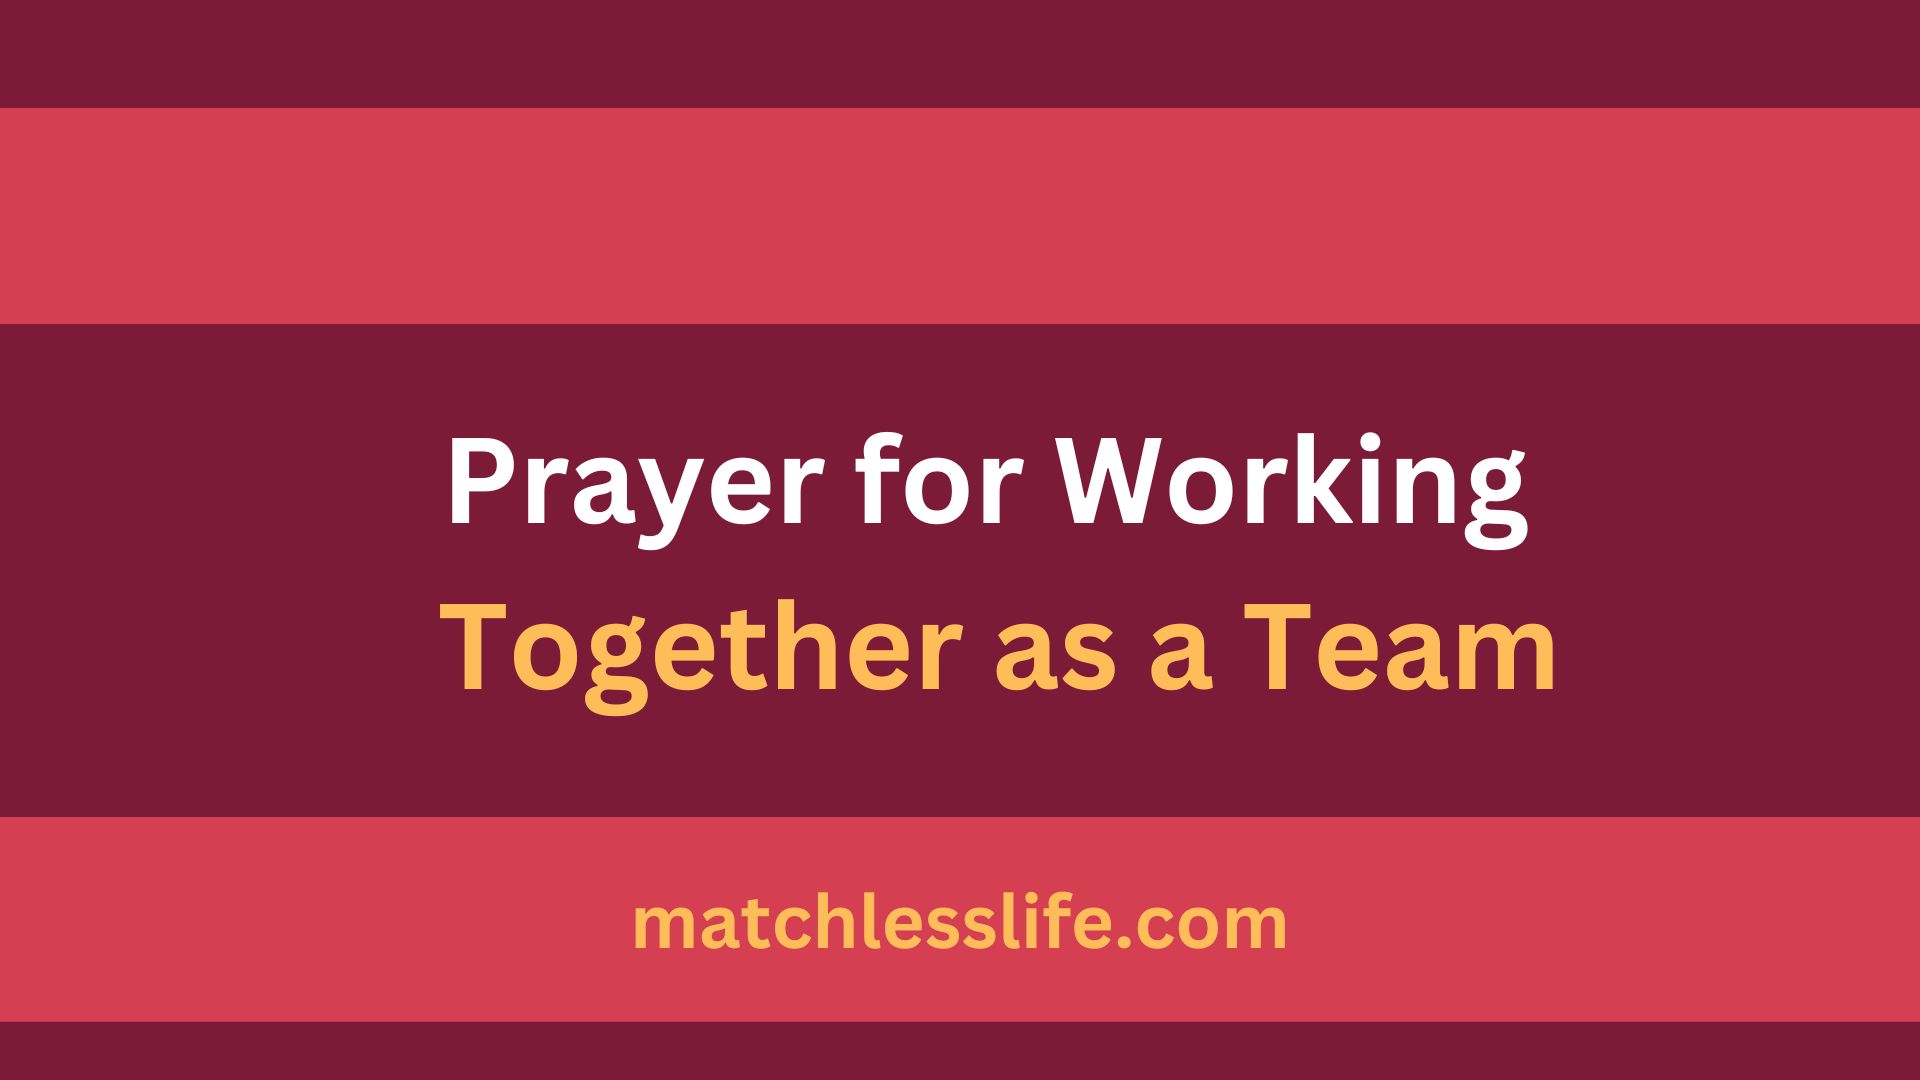 Prayer for working together